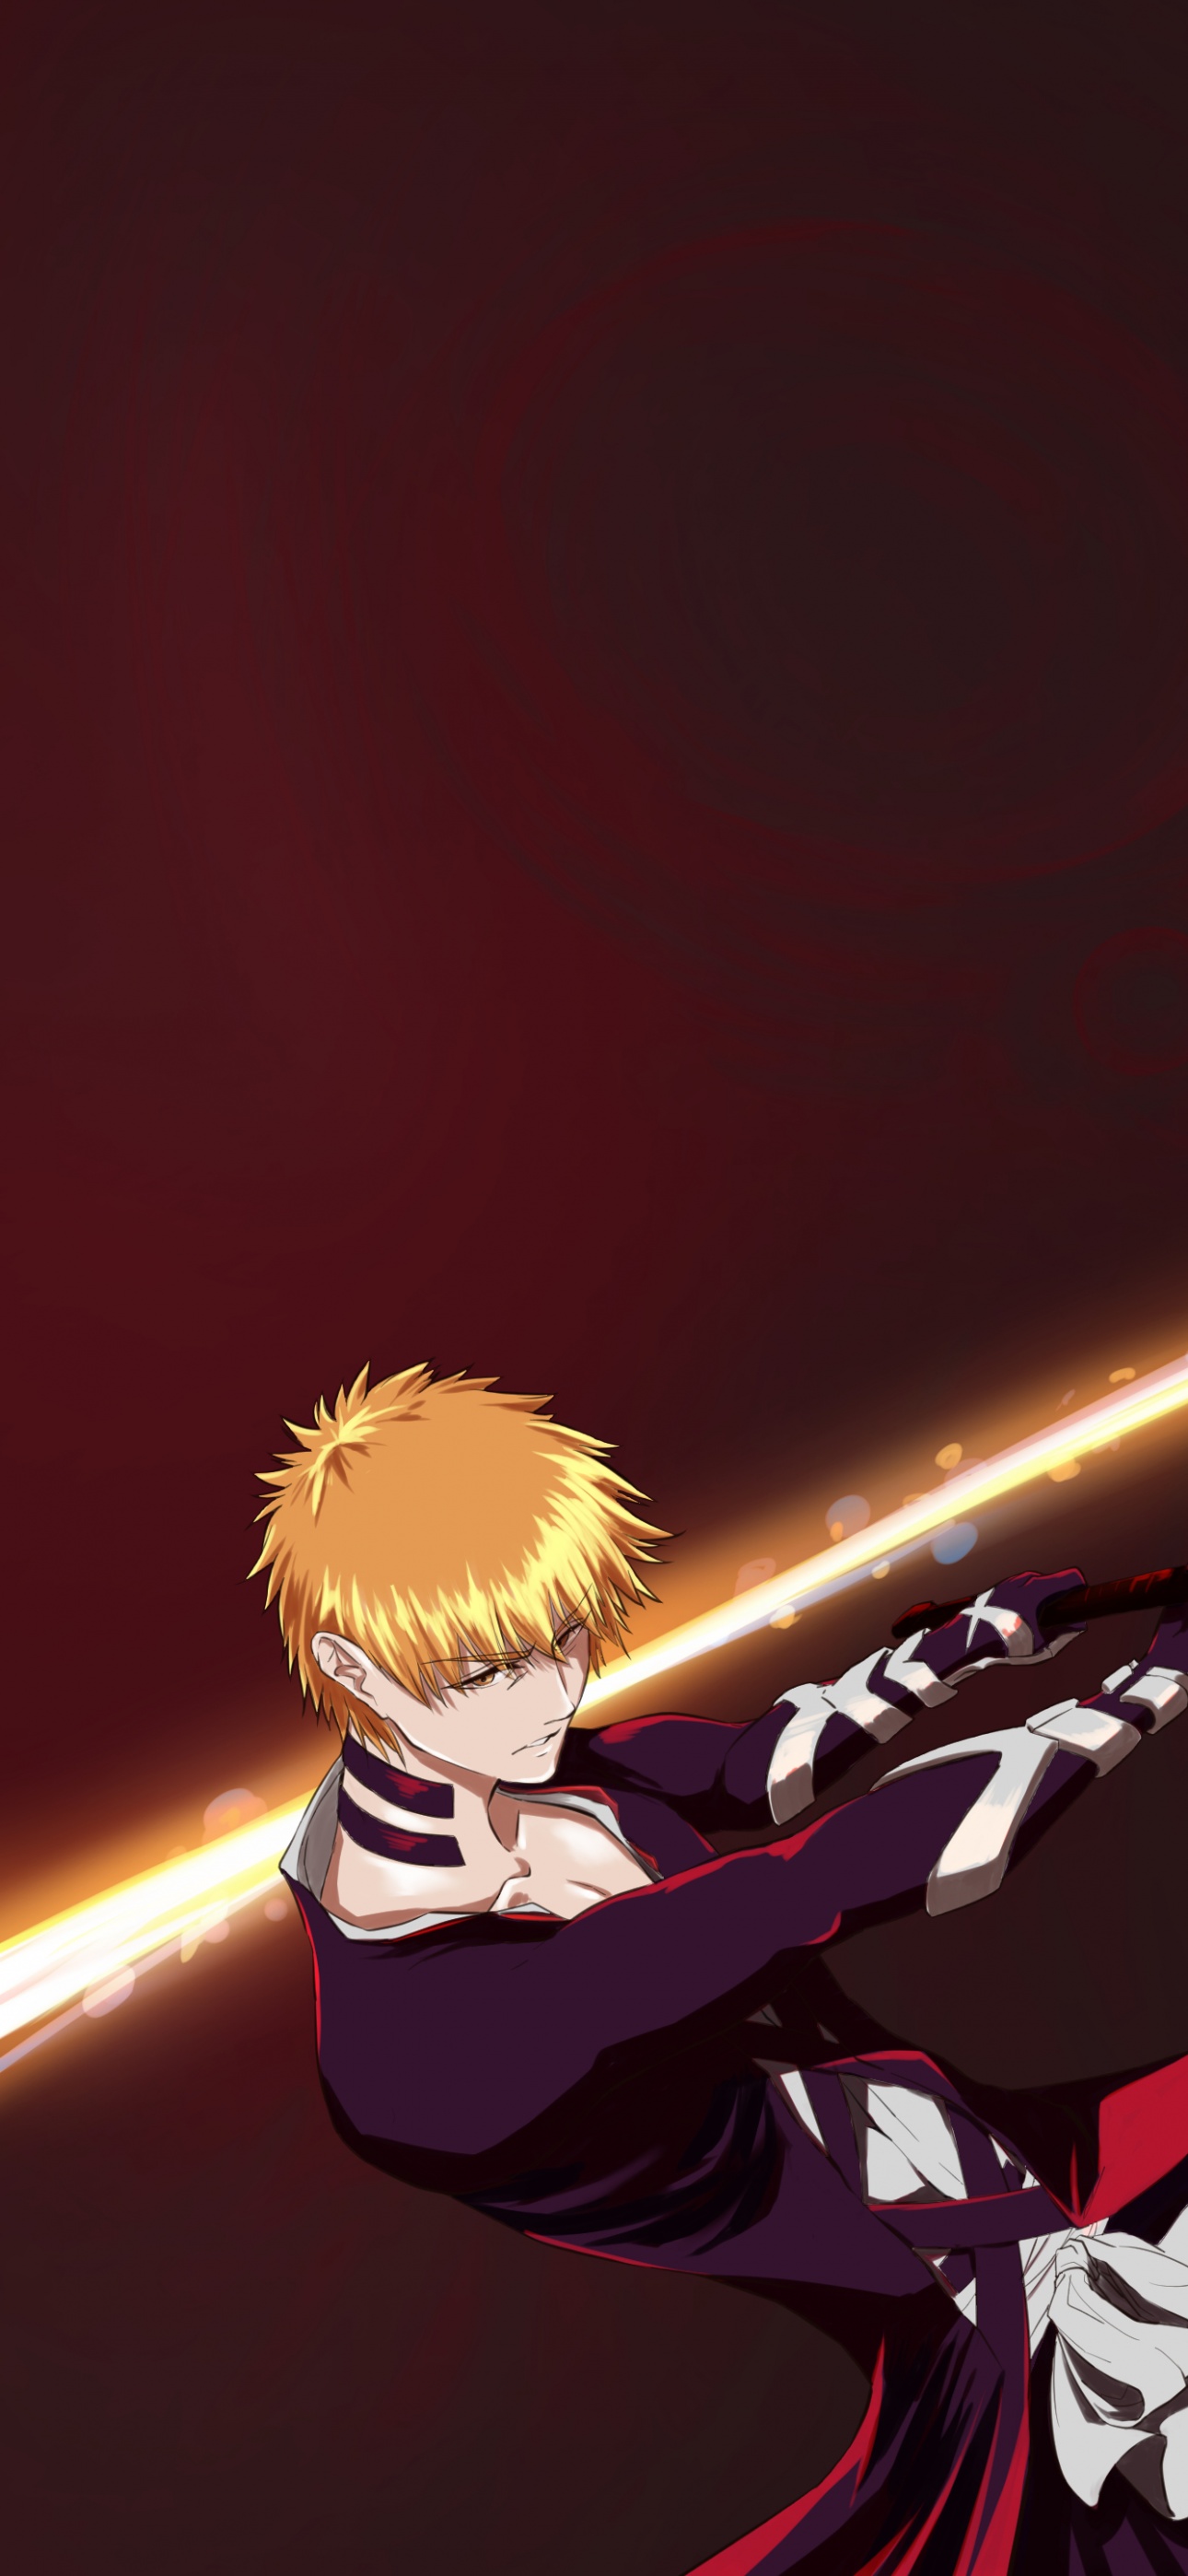 Anime] BLEACH | iPhone Wallpapers